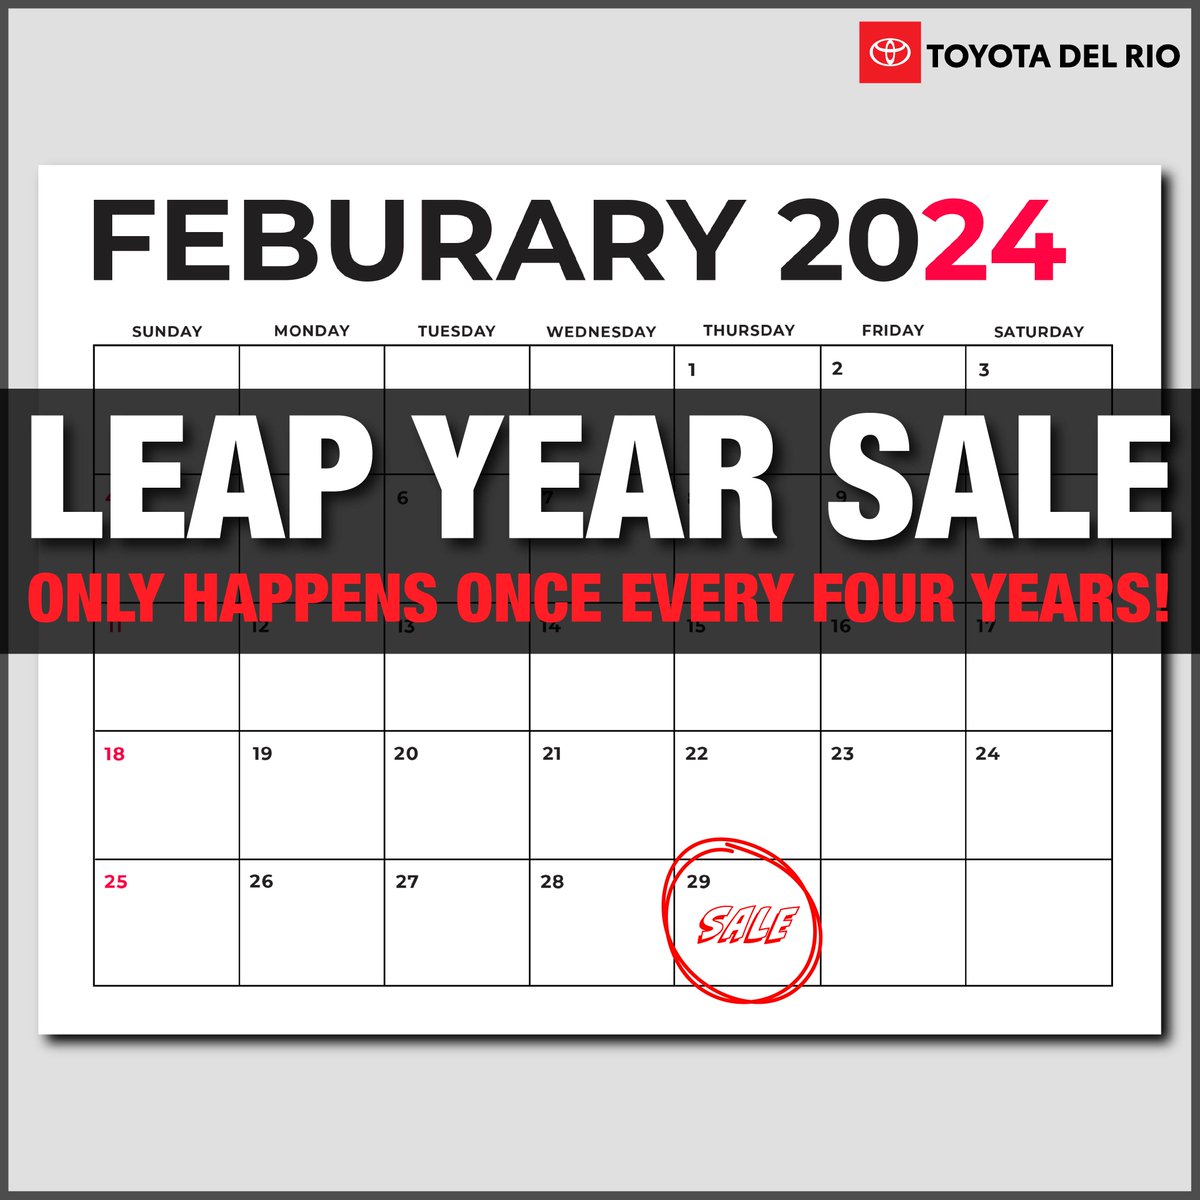 It's February 29th and we are having a Leap Year Sale! 🤩

It only happens ONCE EVERY FOUR YEARS, so don't miss your chance to save BIG on your next vehicle!

#toyotadelrio #toyota #delriotx #drtx #leapyear #sale